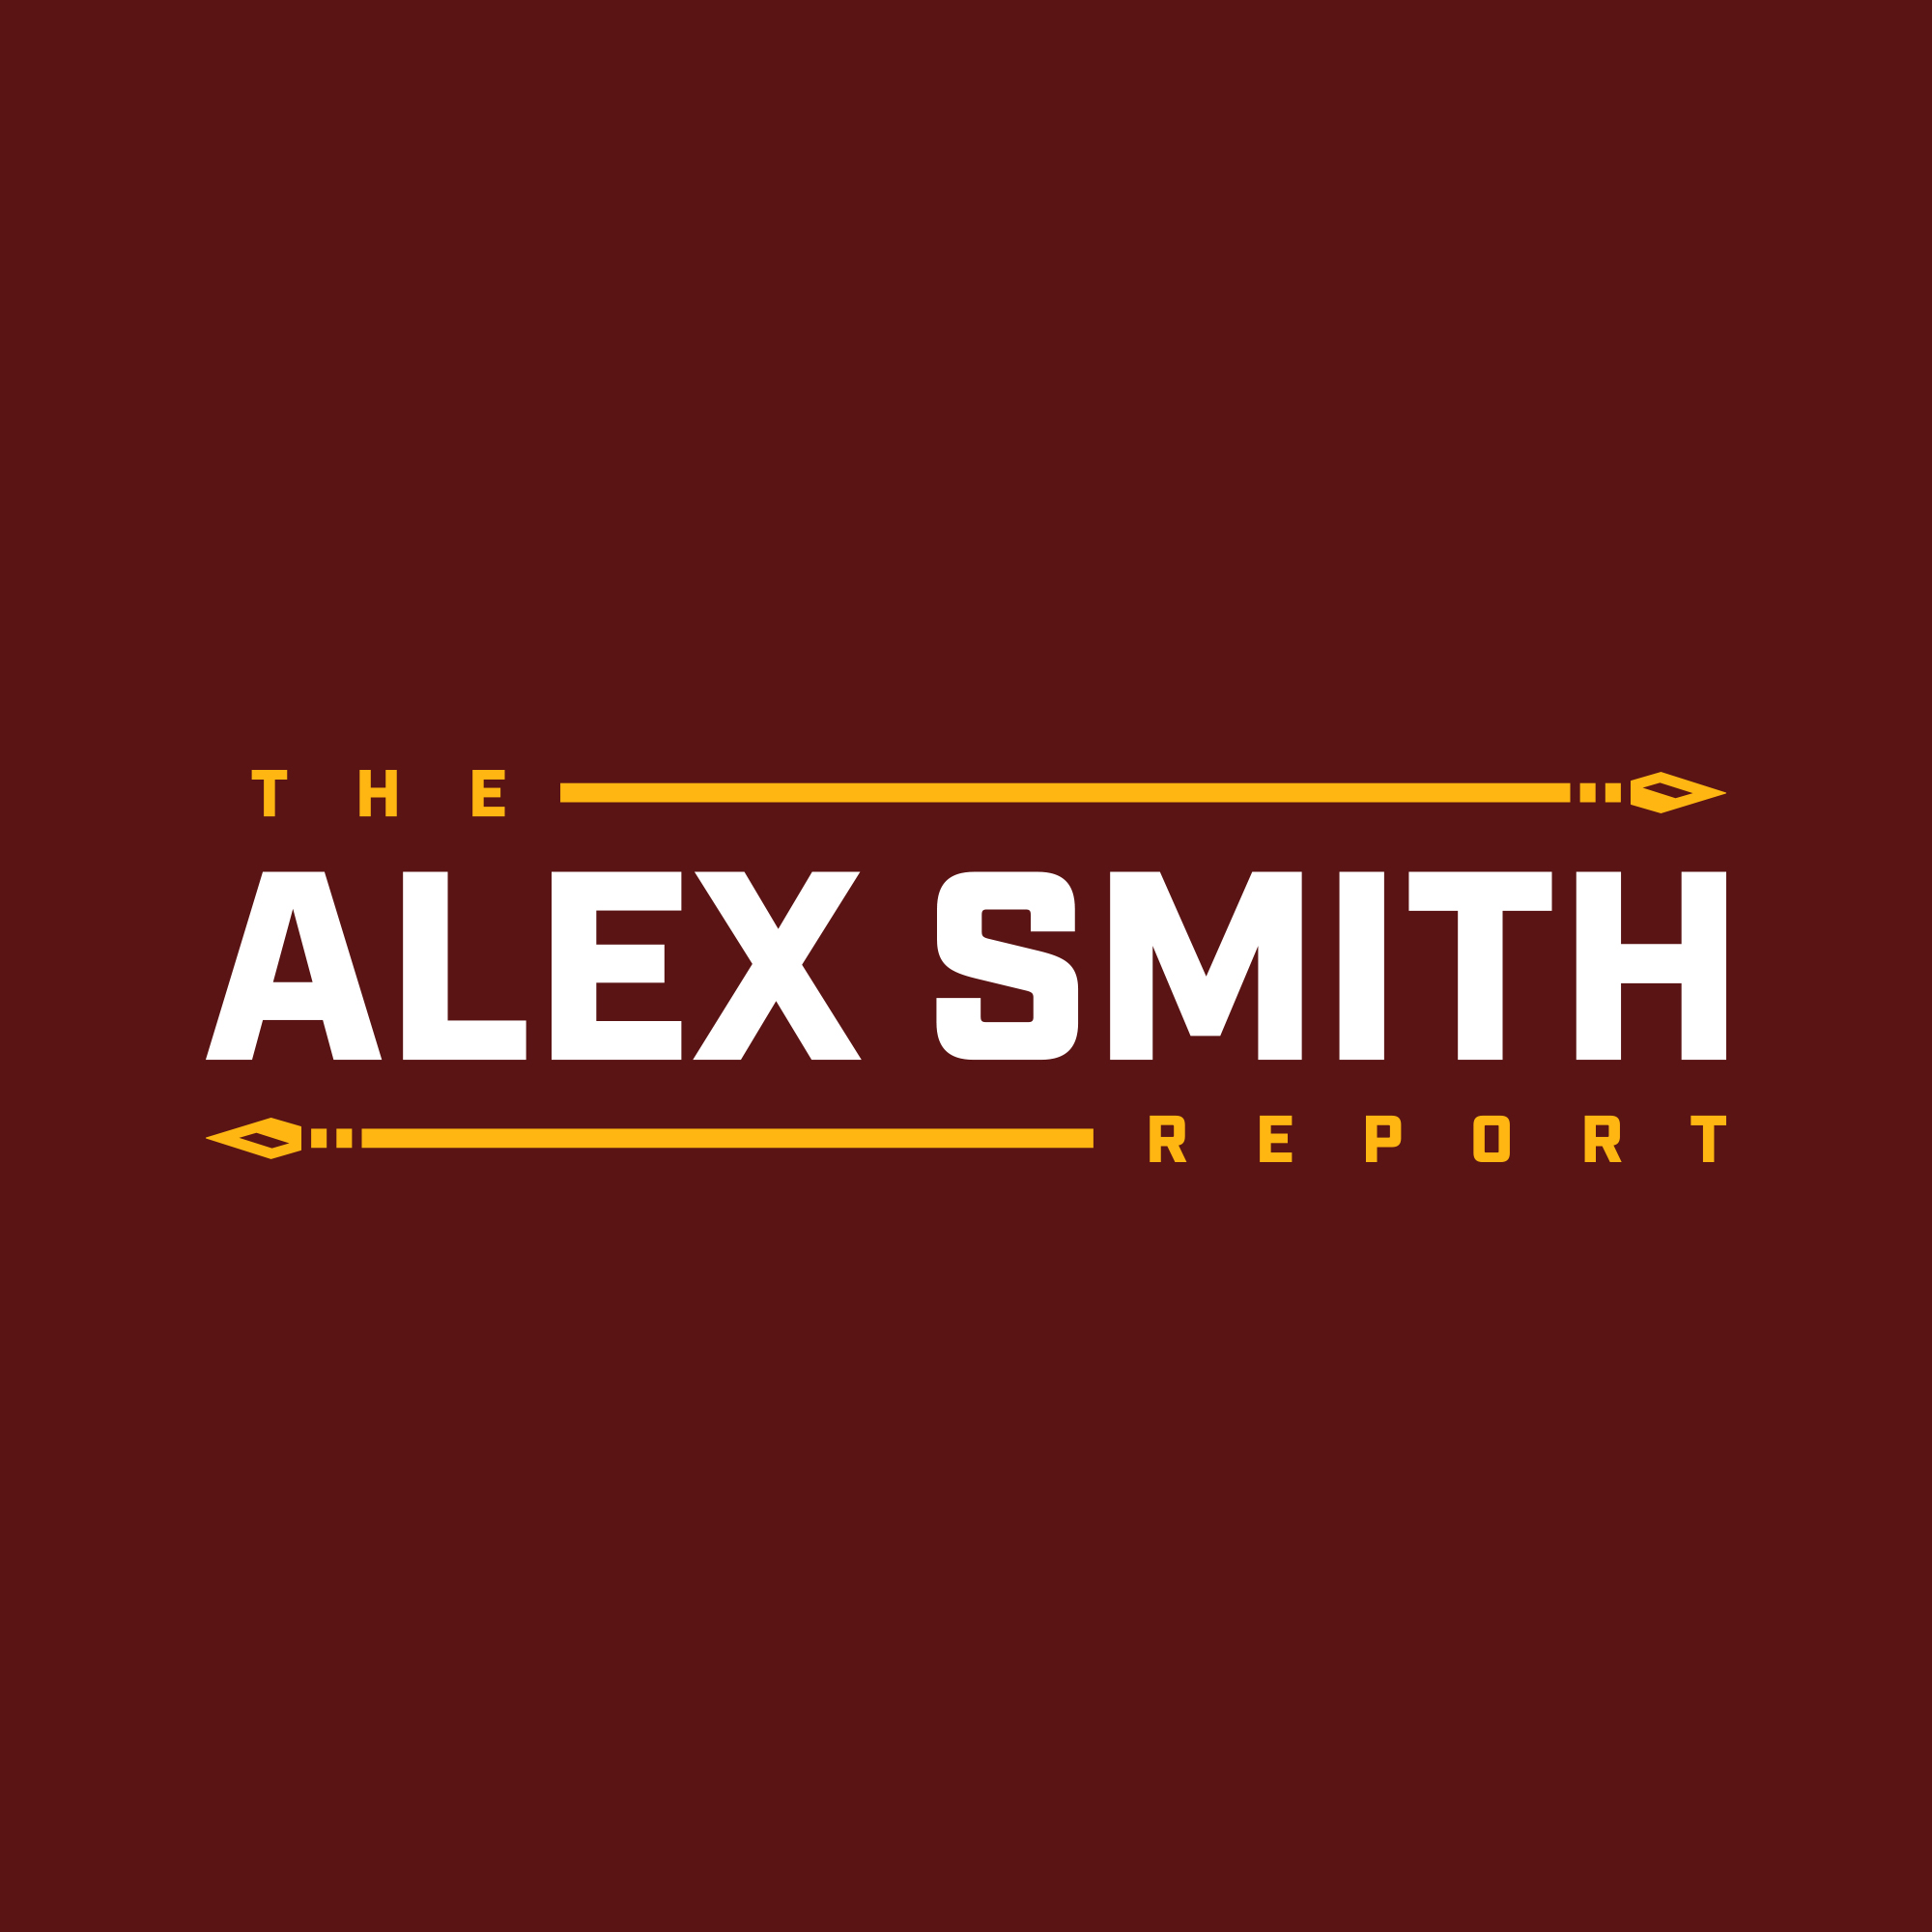 Episode 12 - The return of the Alex Smith Report!